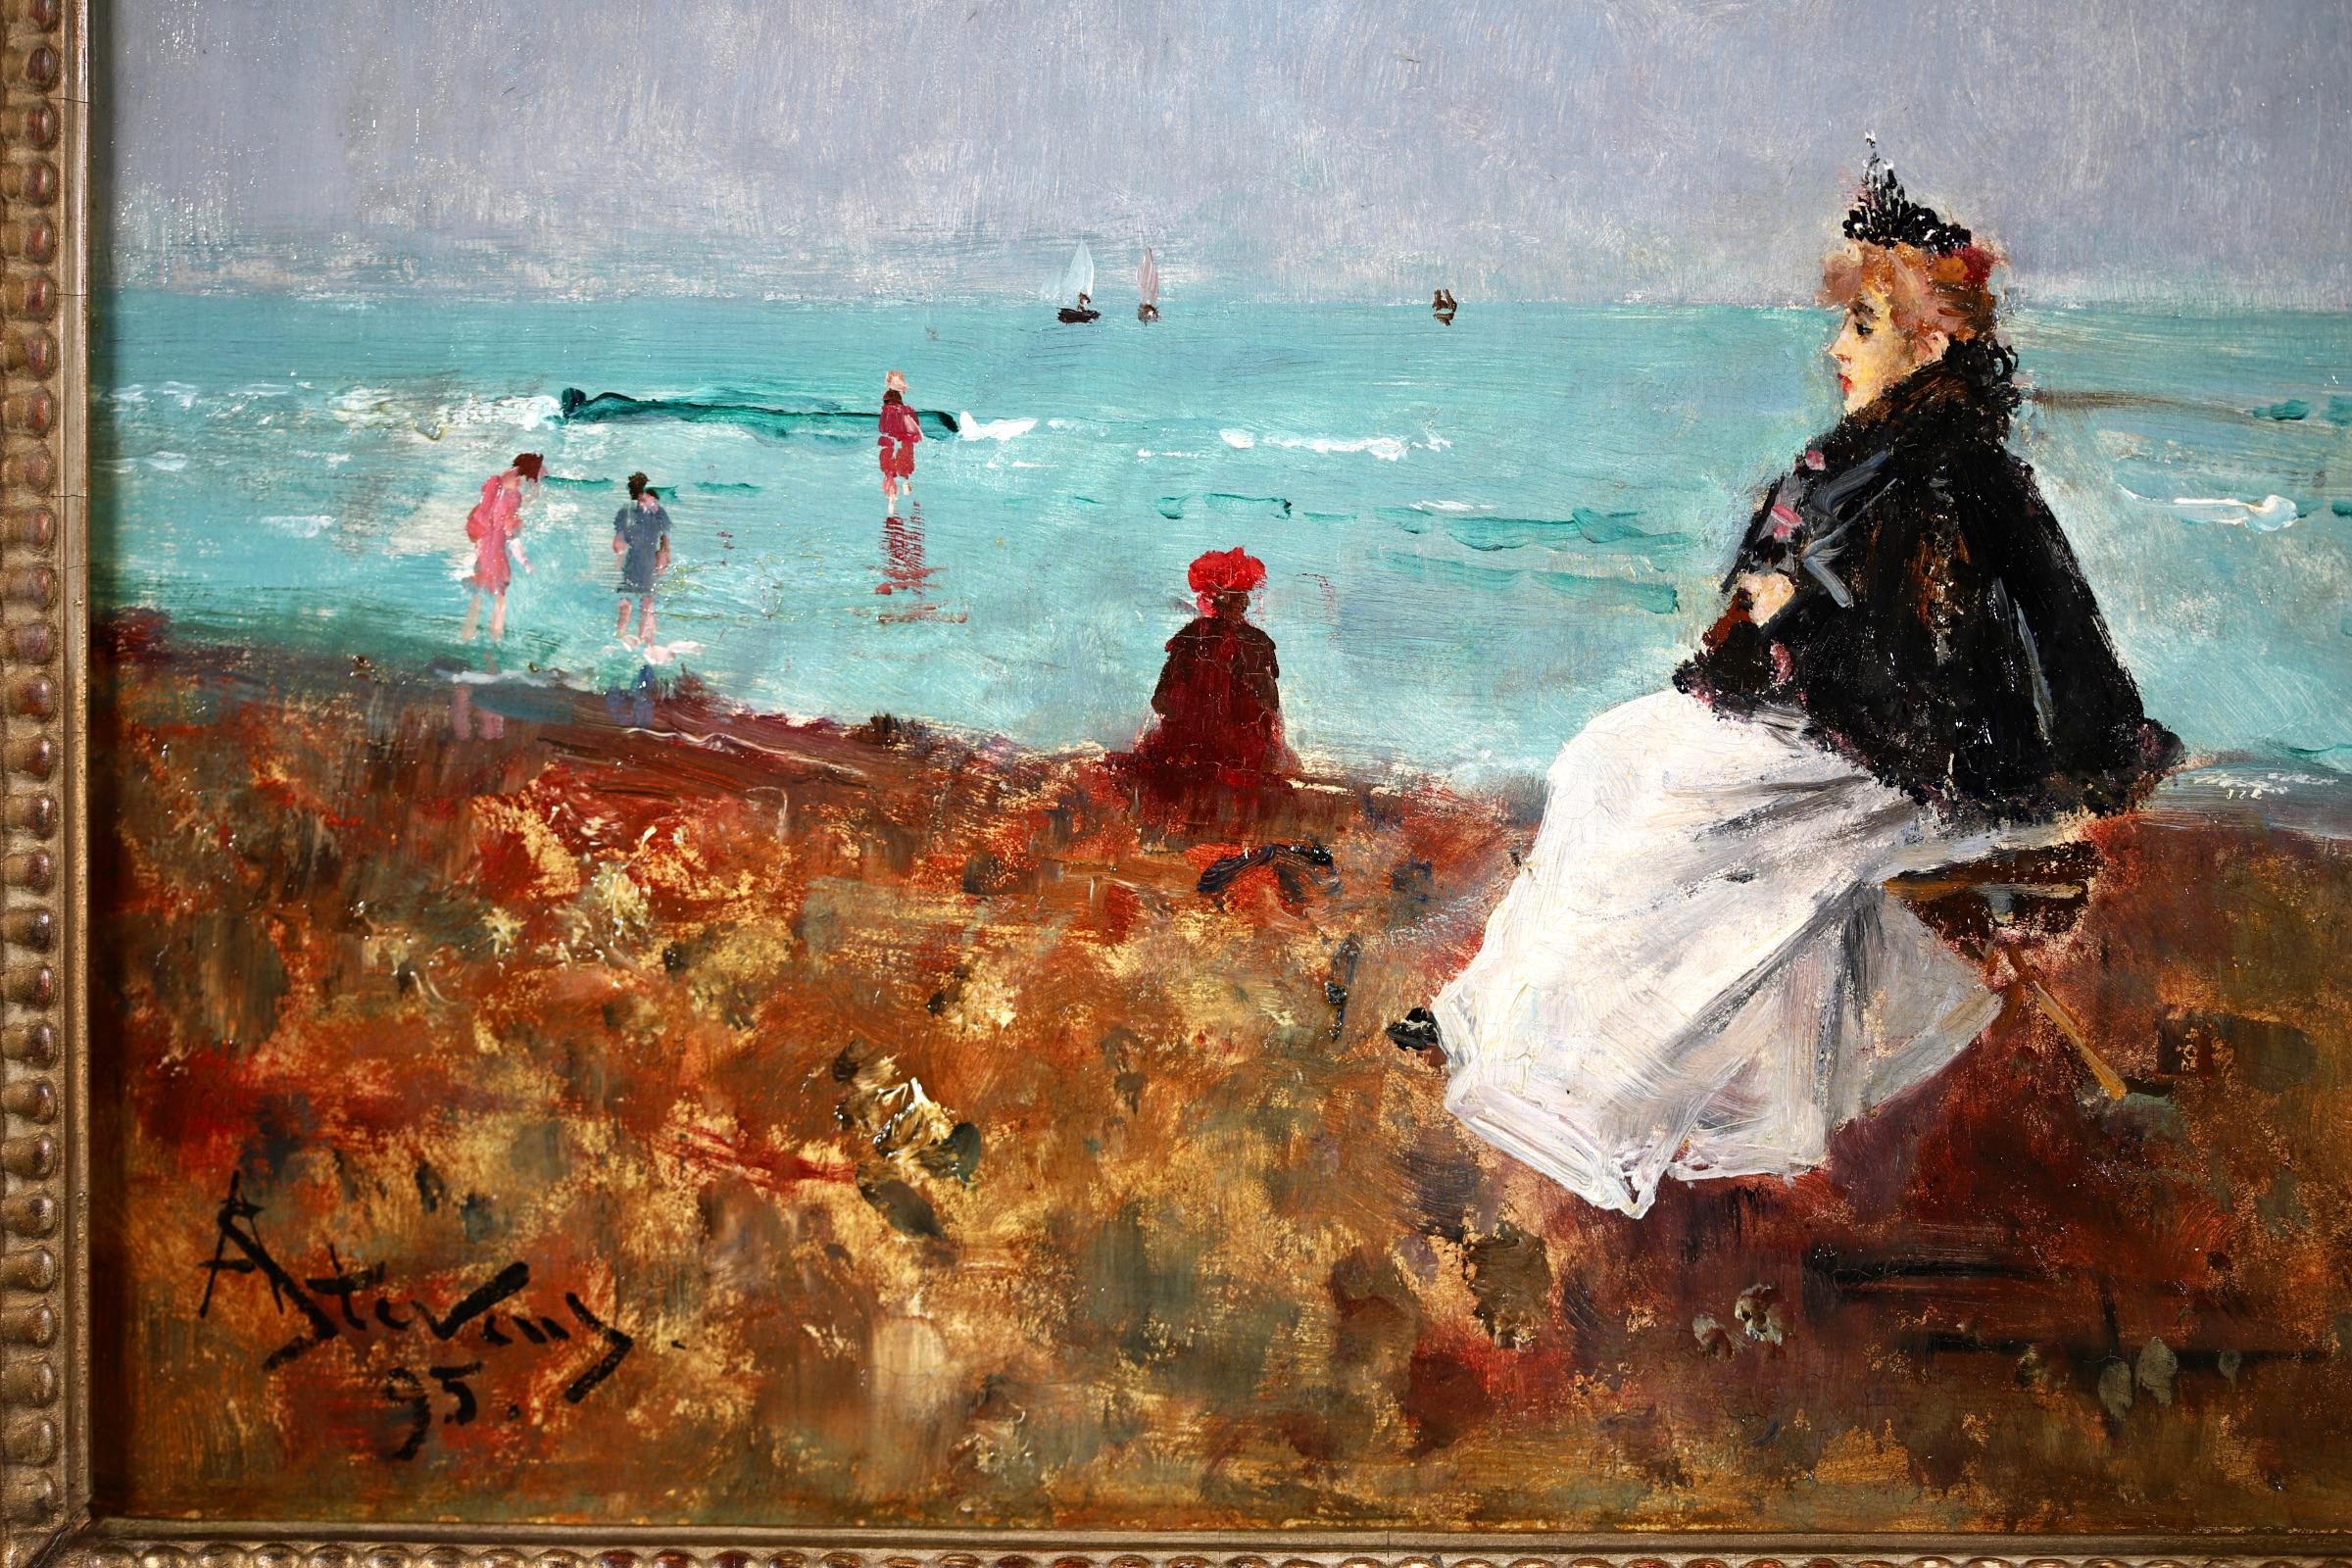 Signed and dated figures in seascape oil on panel by Belgian impressionist painter Alfred Emile Leopold Stevens. The work depicts an elegant woman sat on a stall at the beach as children paddle in the turquoise sea. 

Signature:
Signed and dated